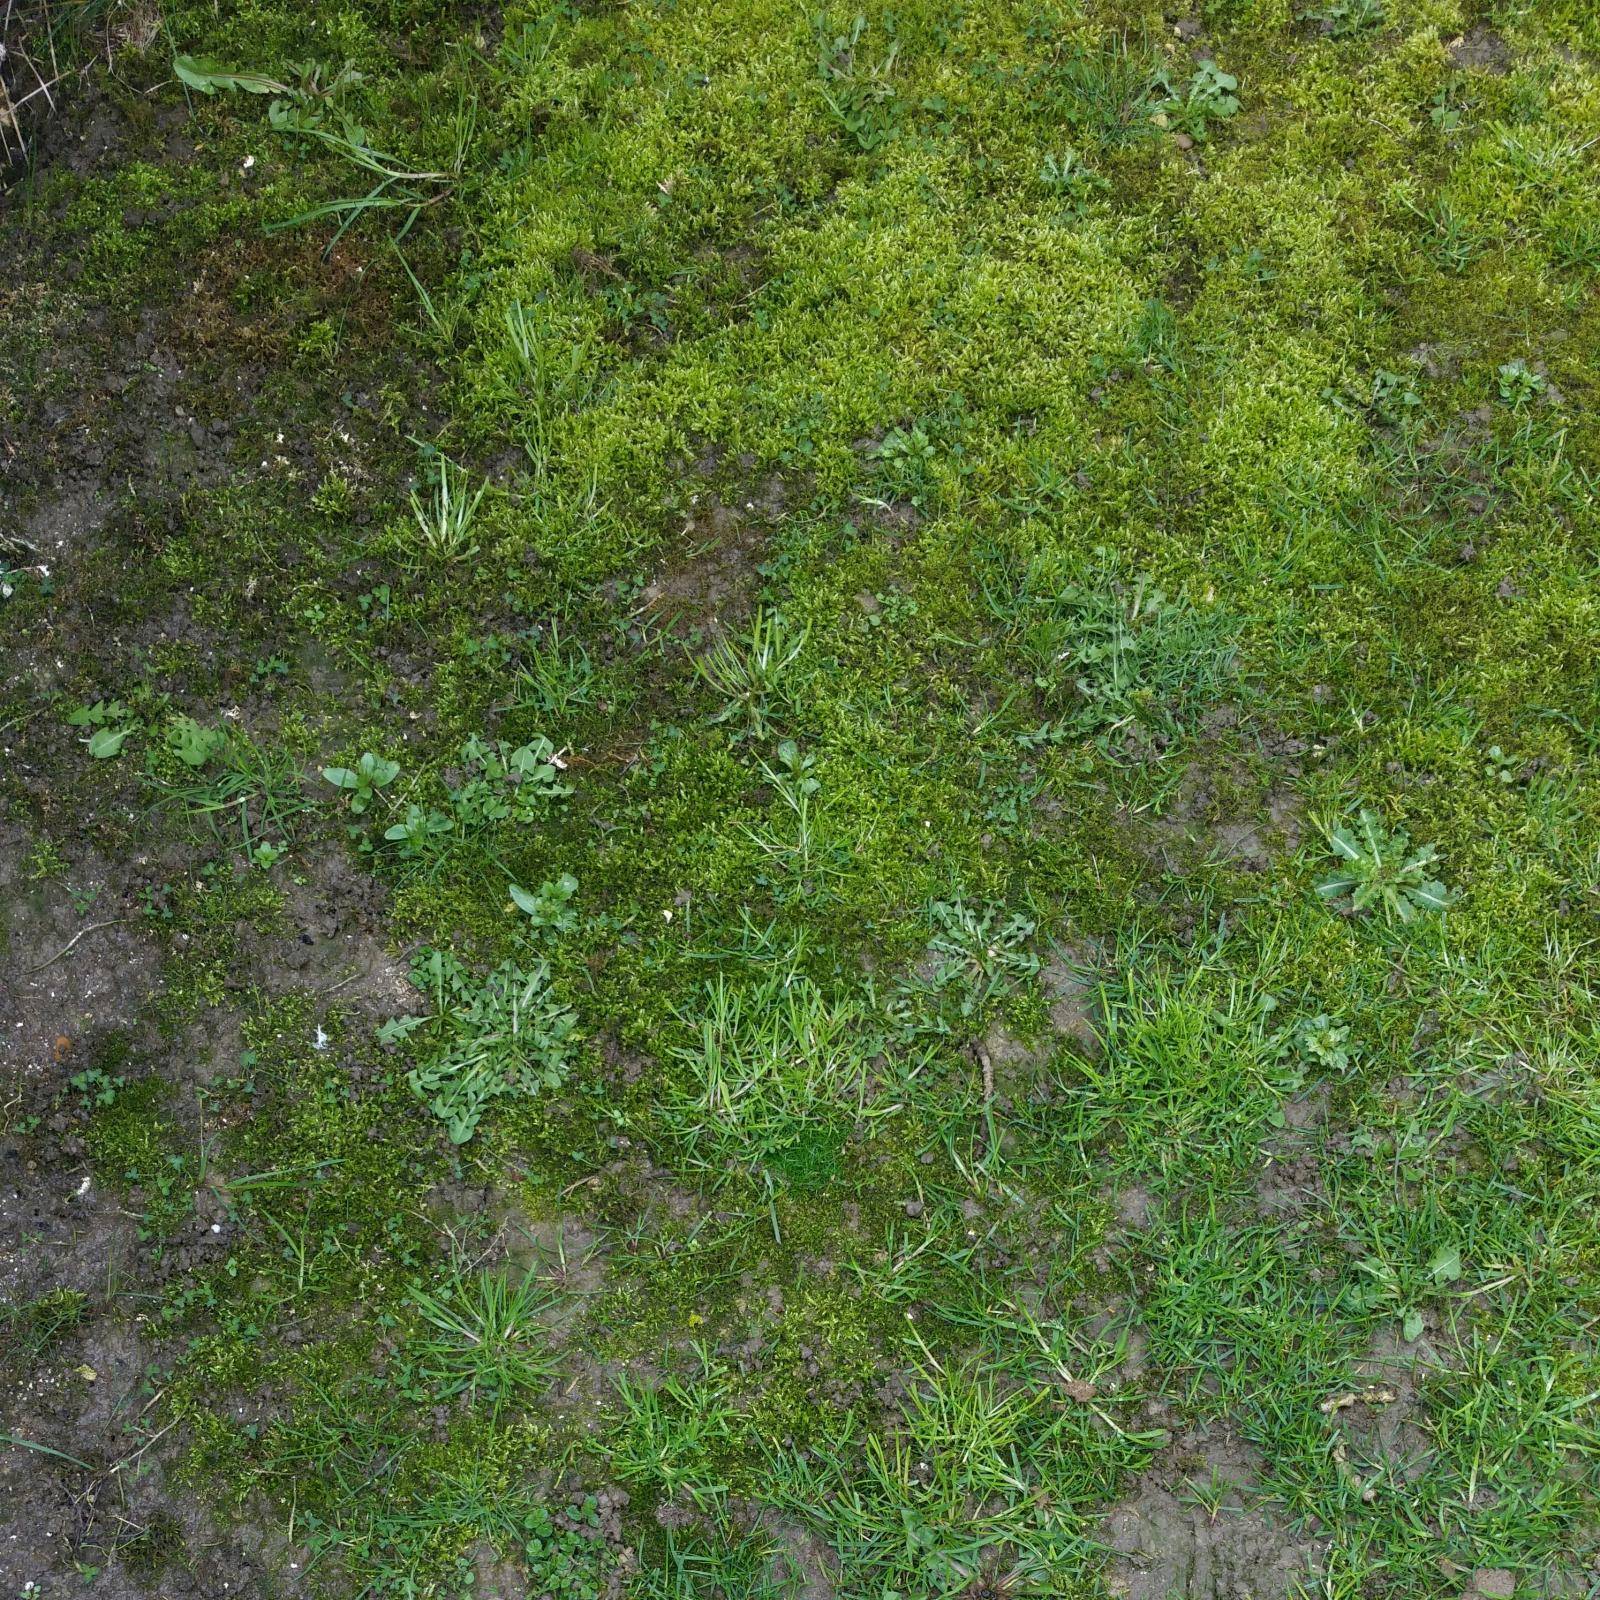 grass - What's the best way to eliminate the moss in a shady, damp ...